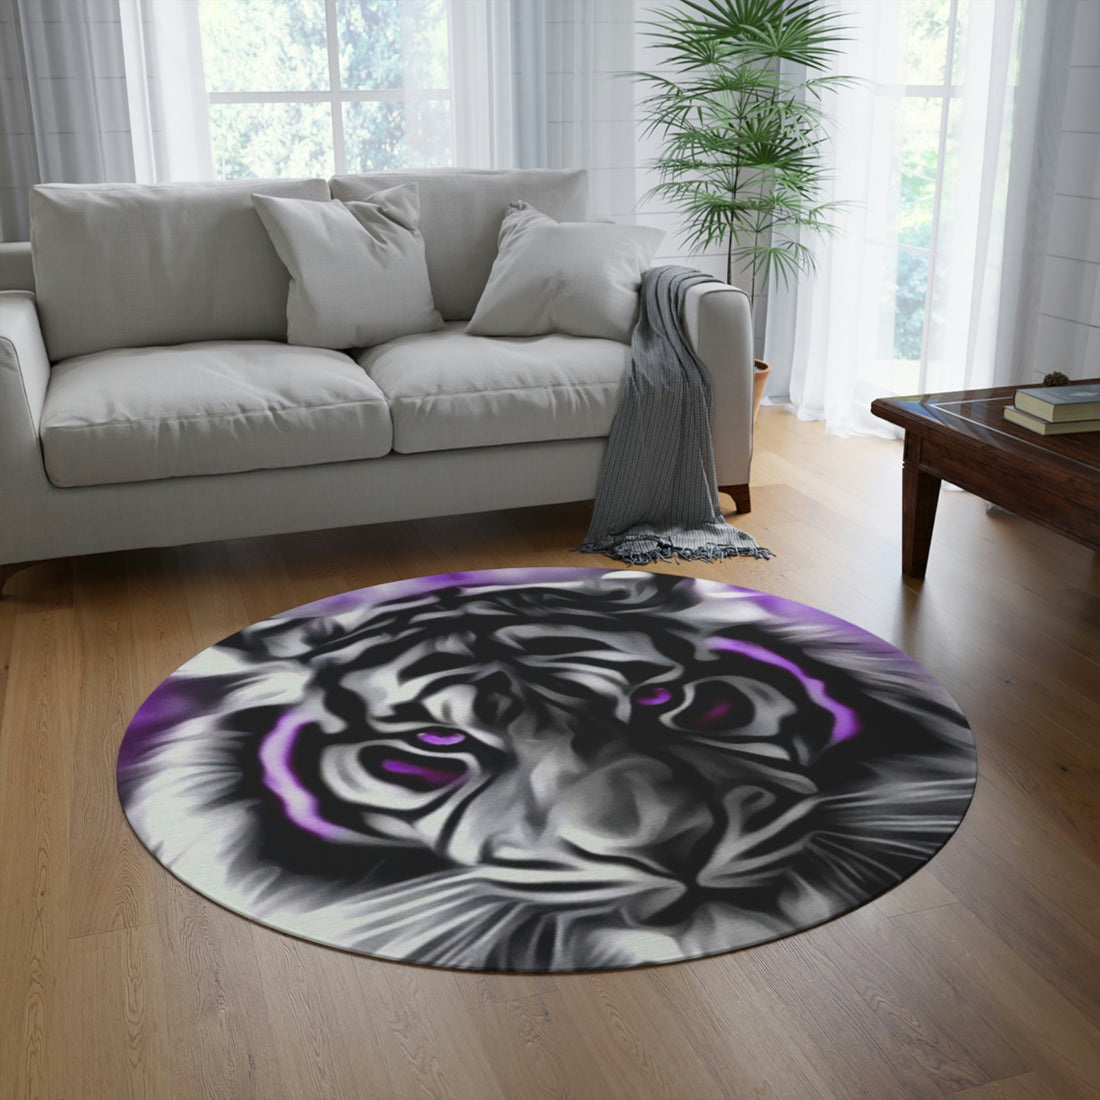 Round Rug Purple Tiger Home-clothes-jewelry